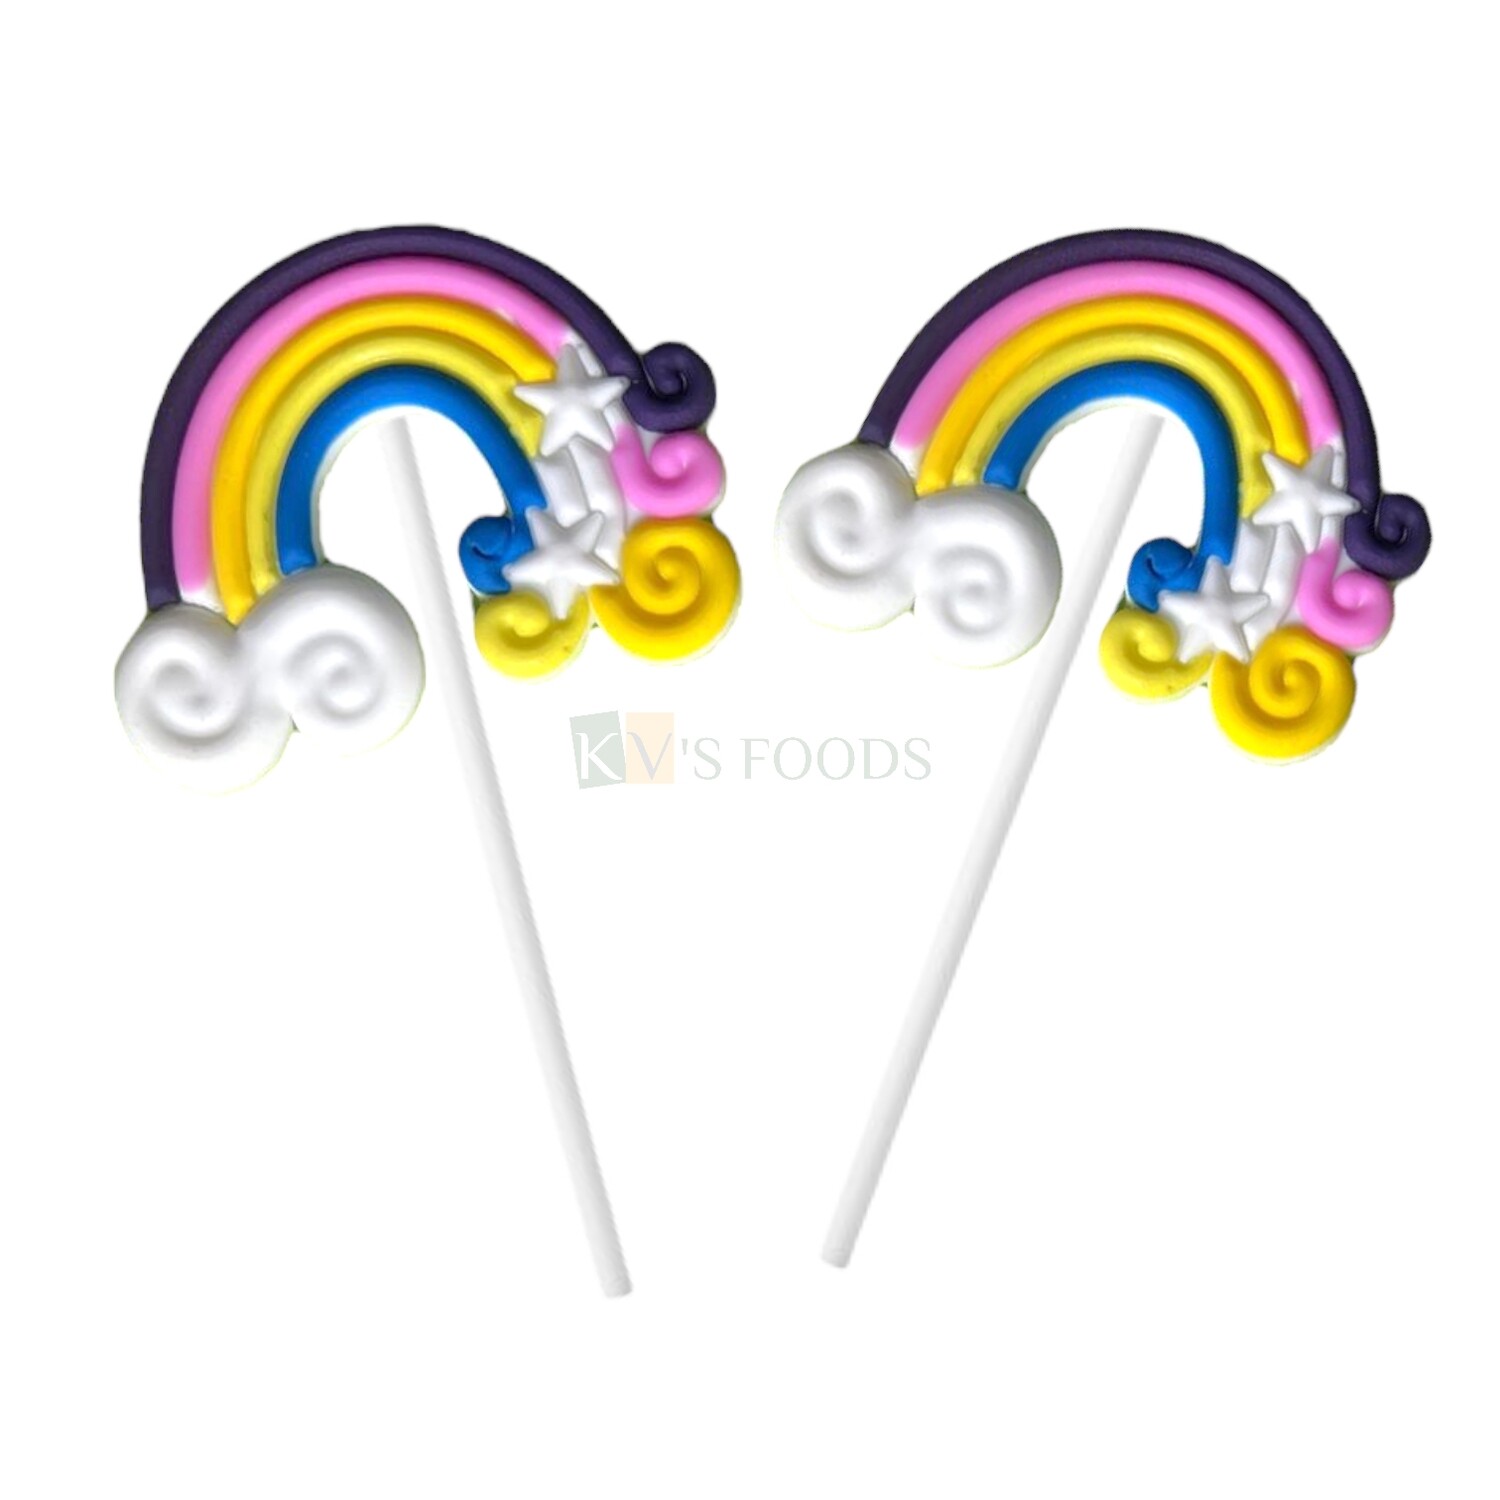 2pc Mini Rainbow with Curl Stars & Cloud Cake Topper for Unicorn Baby shower Themes, Cake Insert, Cake Topper, Girls, Boys, Friends Bday, Cake Decoration Item, Cake Accessories, DIY Cake Decor